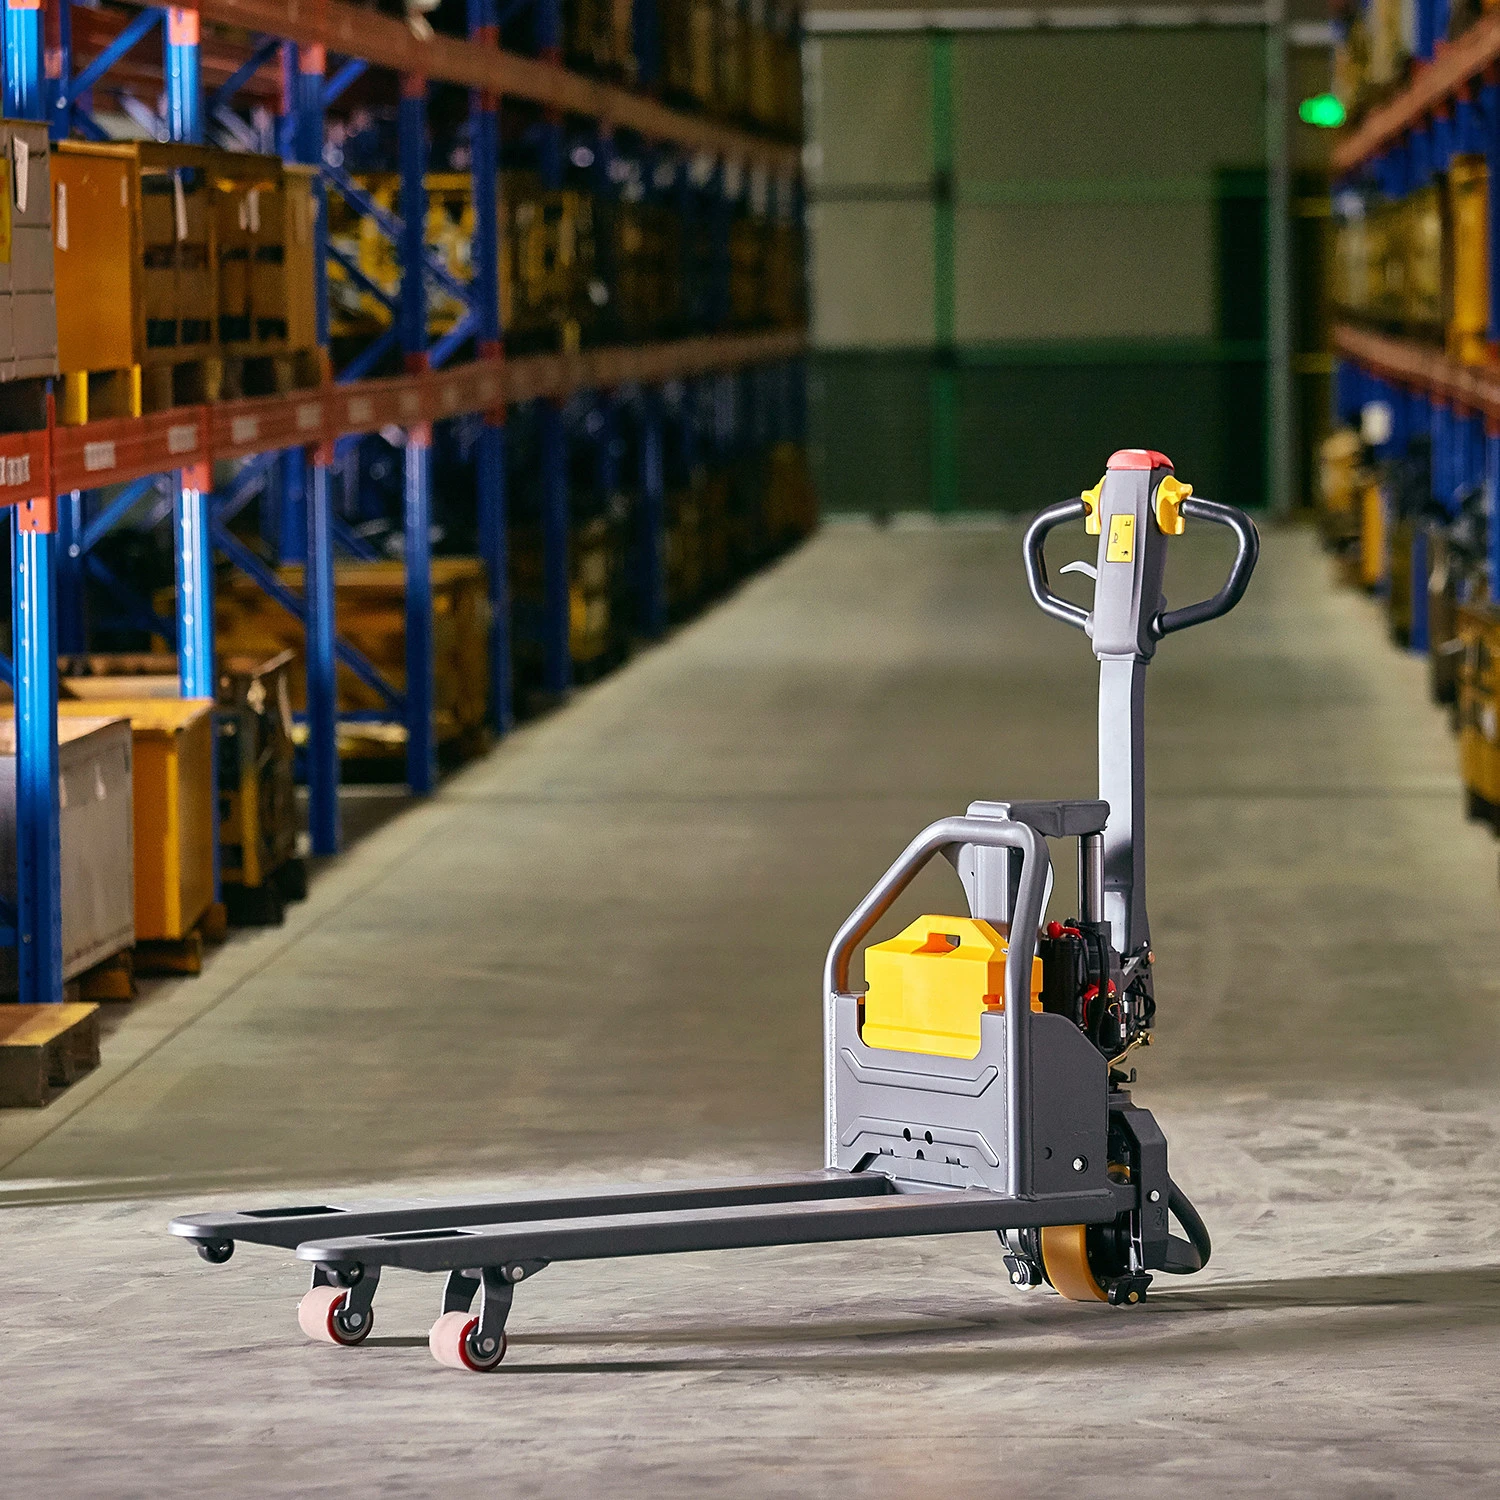 Factory direct supply pallet jack sale lowes quick lift pallet jack 5 tonne pallet jack